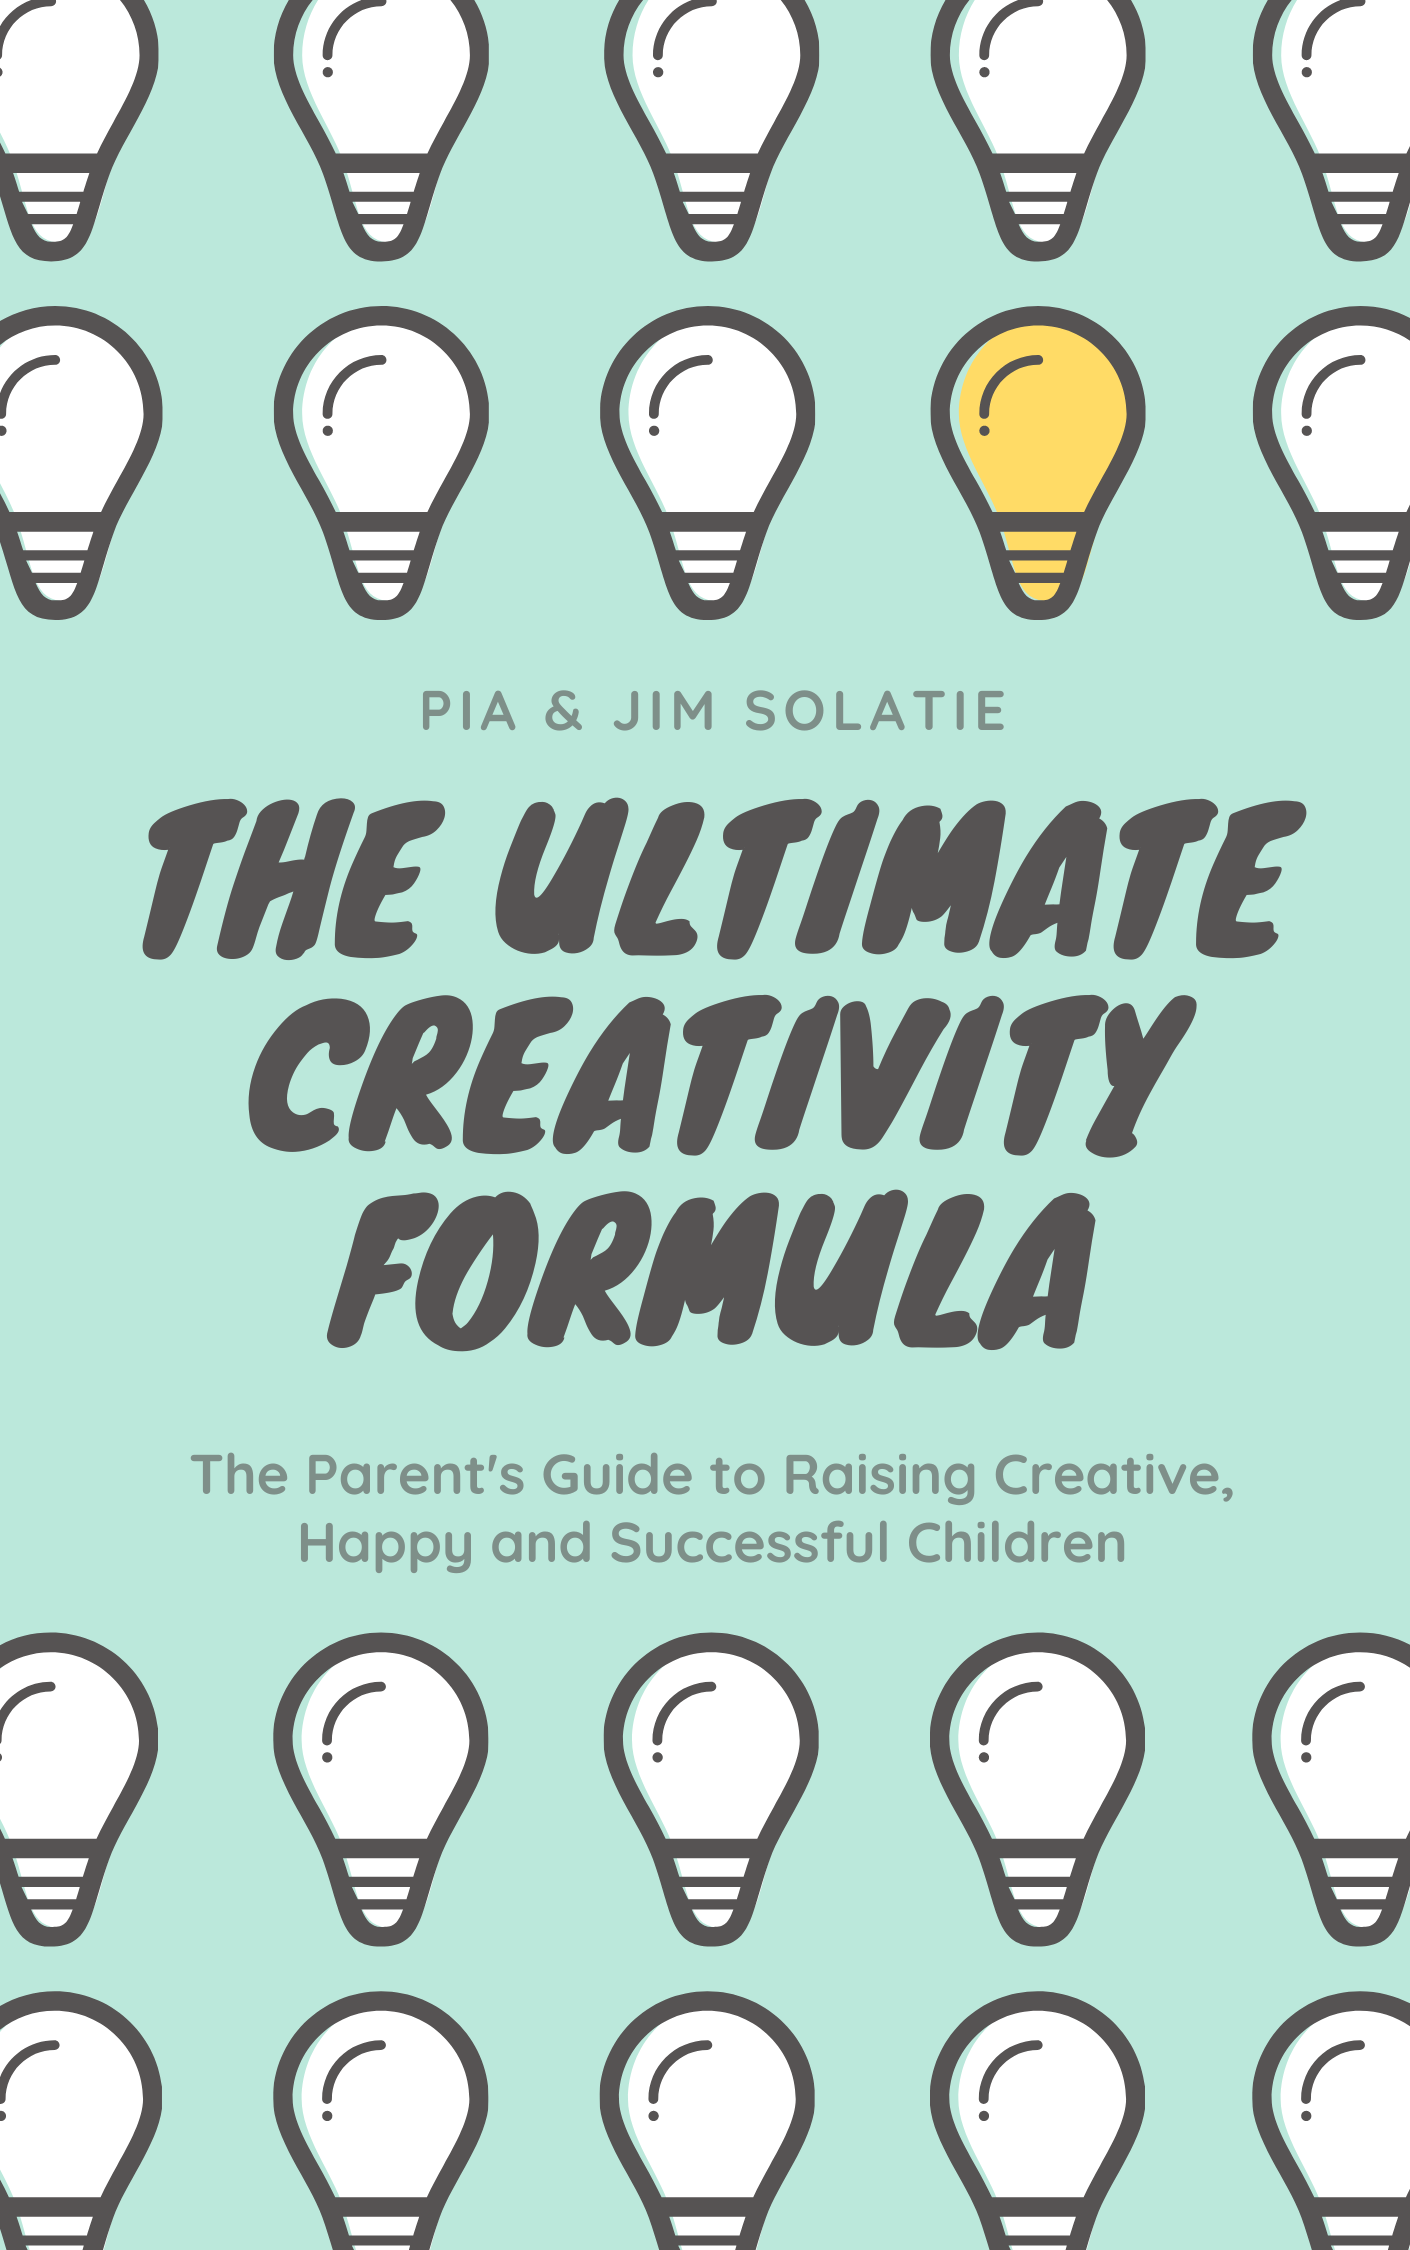 The ultimate Creativity Formula: The Parent's Guide to Raising Creative, Happy and Successful Children